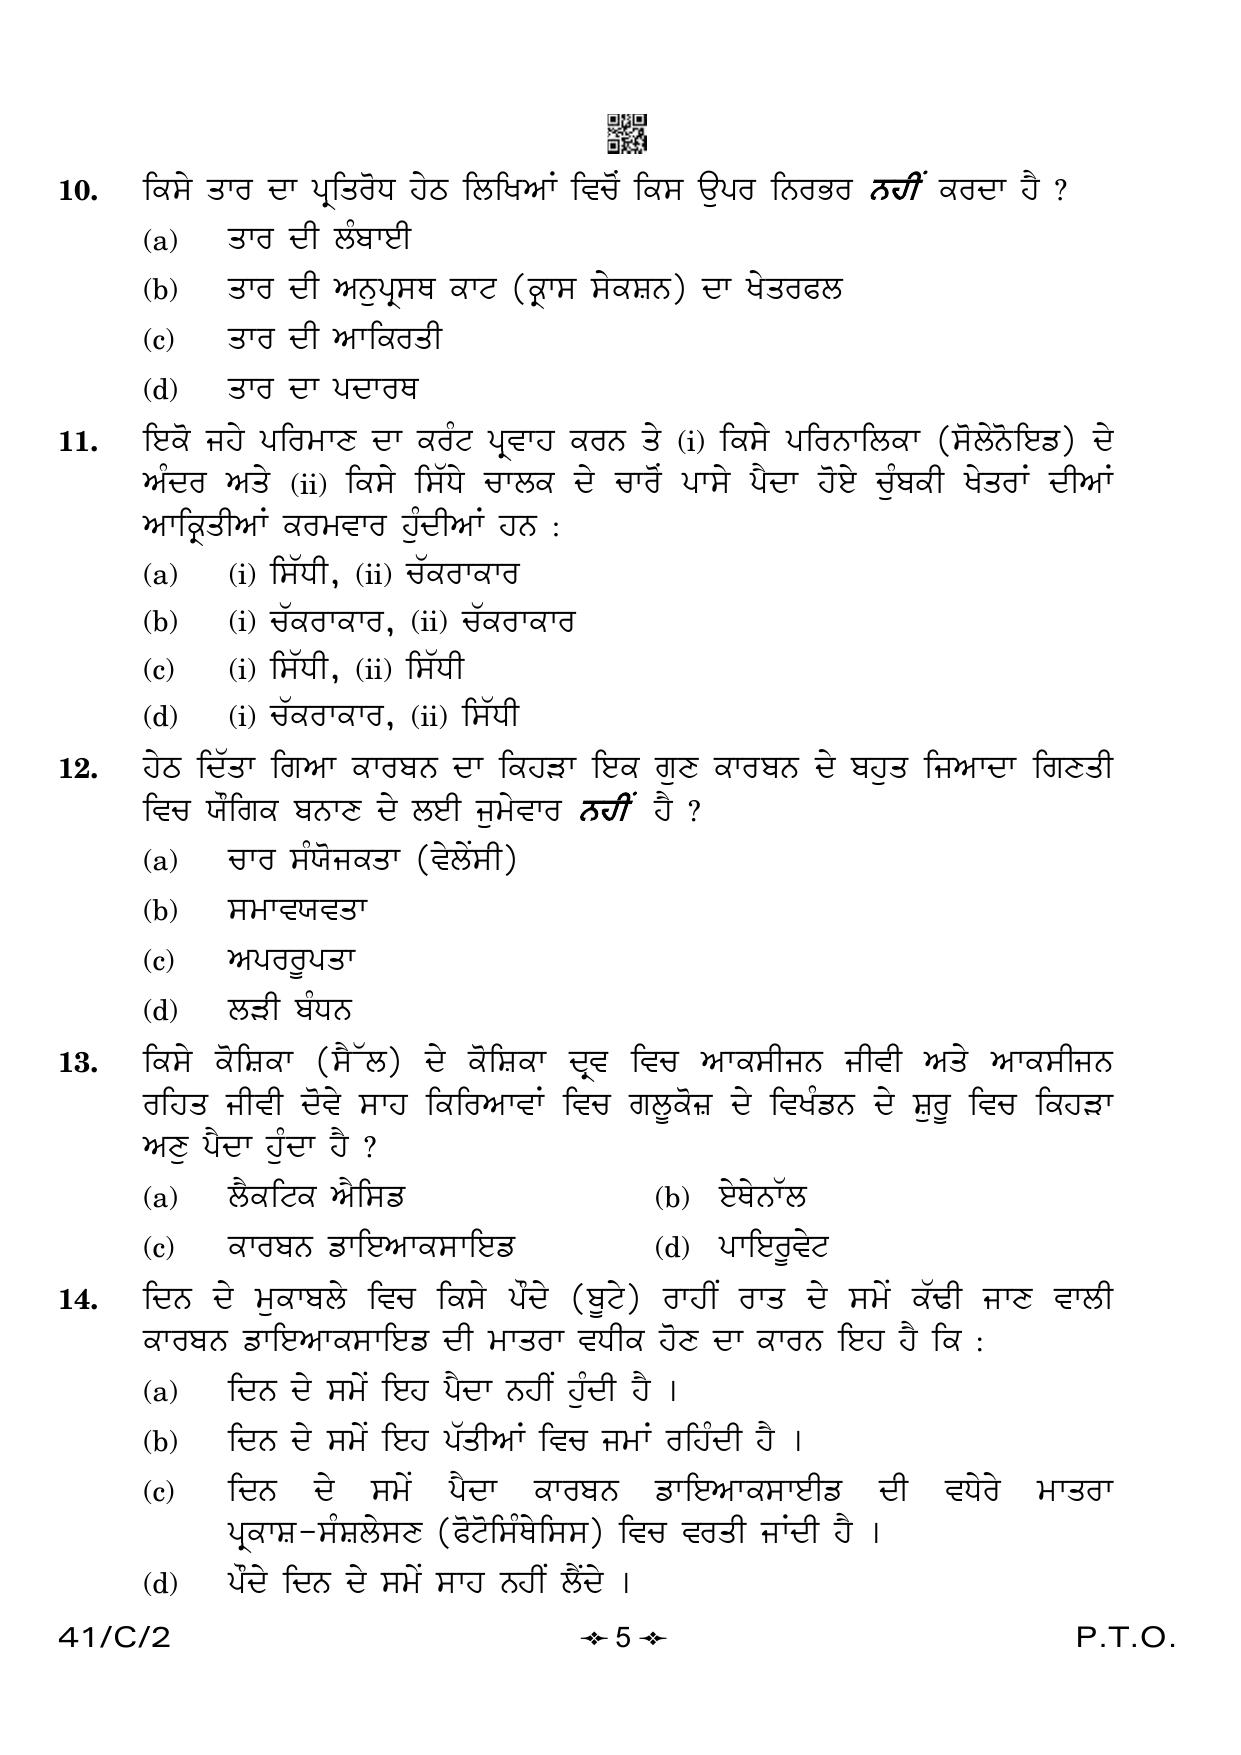 CBSE Class 10 41-2 Science Punjabi 2023 (Compartment) Question Paper - Page 5